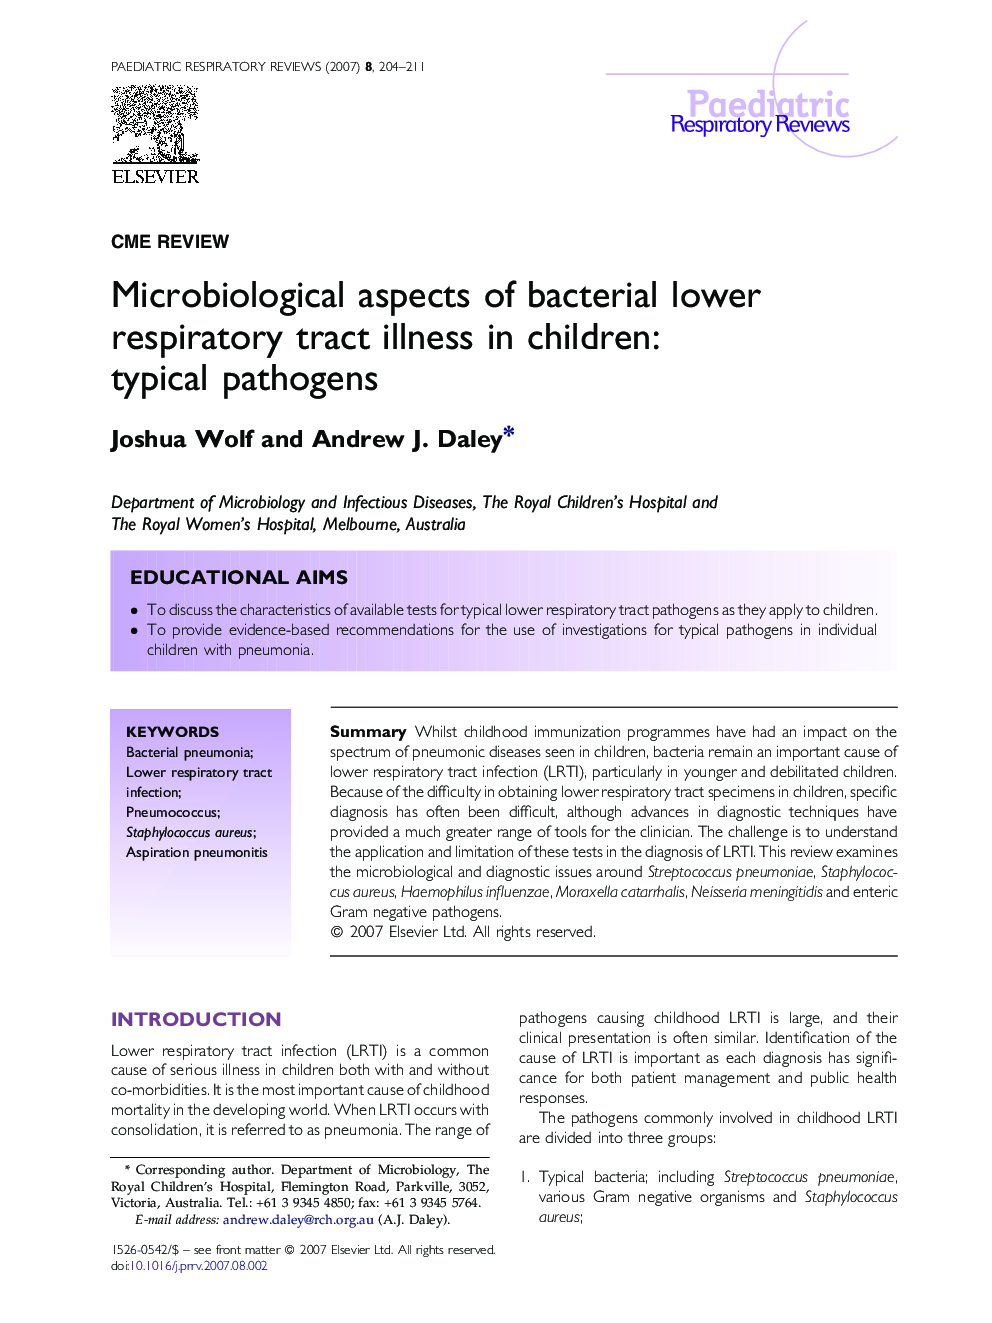 Microbiological aspects of bacterial lower respiratory tract illness in children: typical pathogens